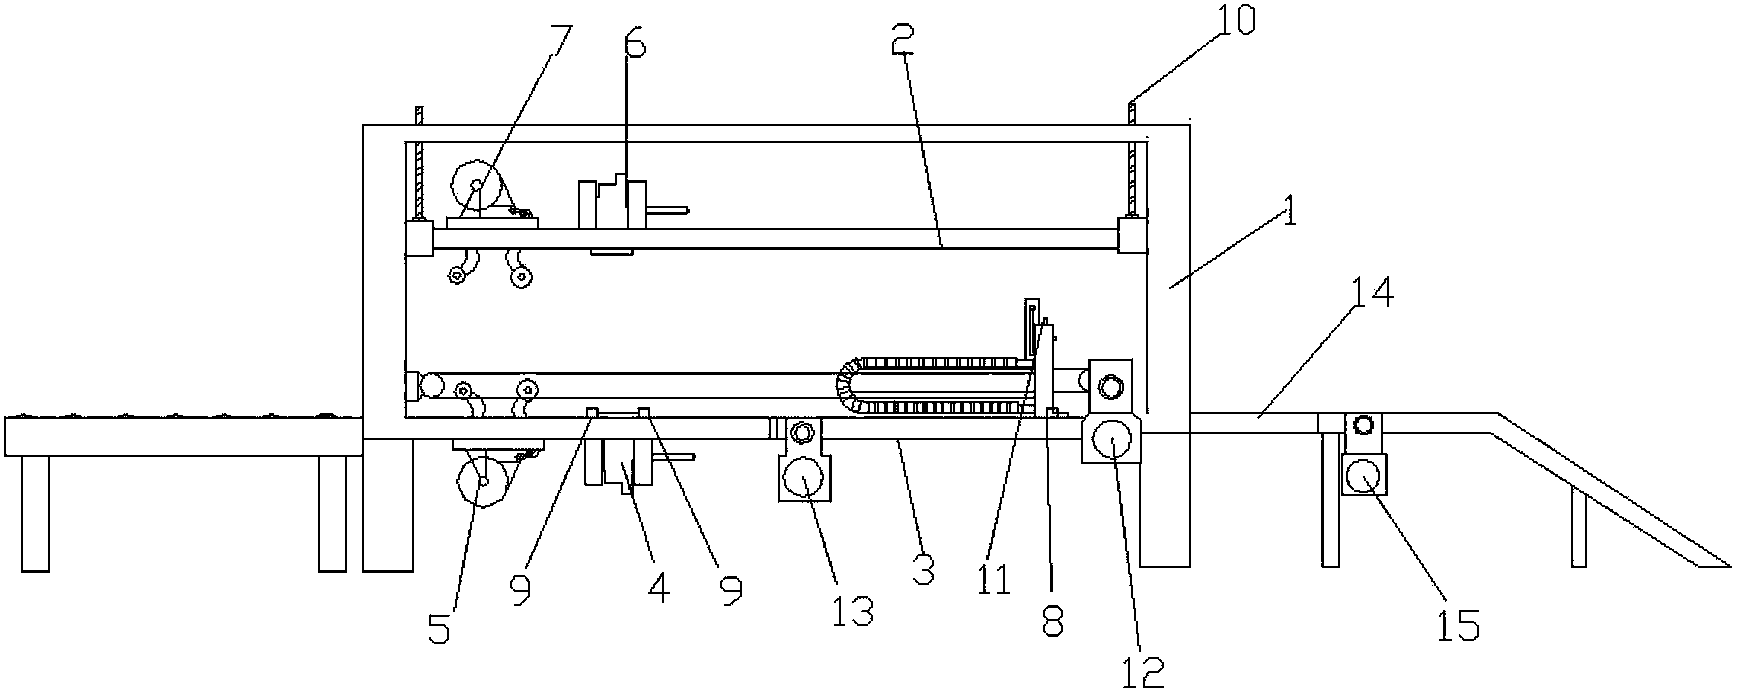 Integrated device with automatic box sealing and nailing functions